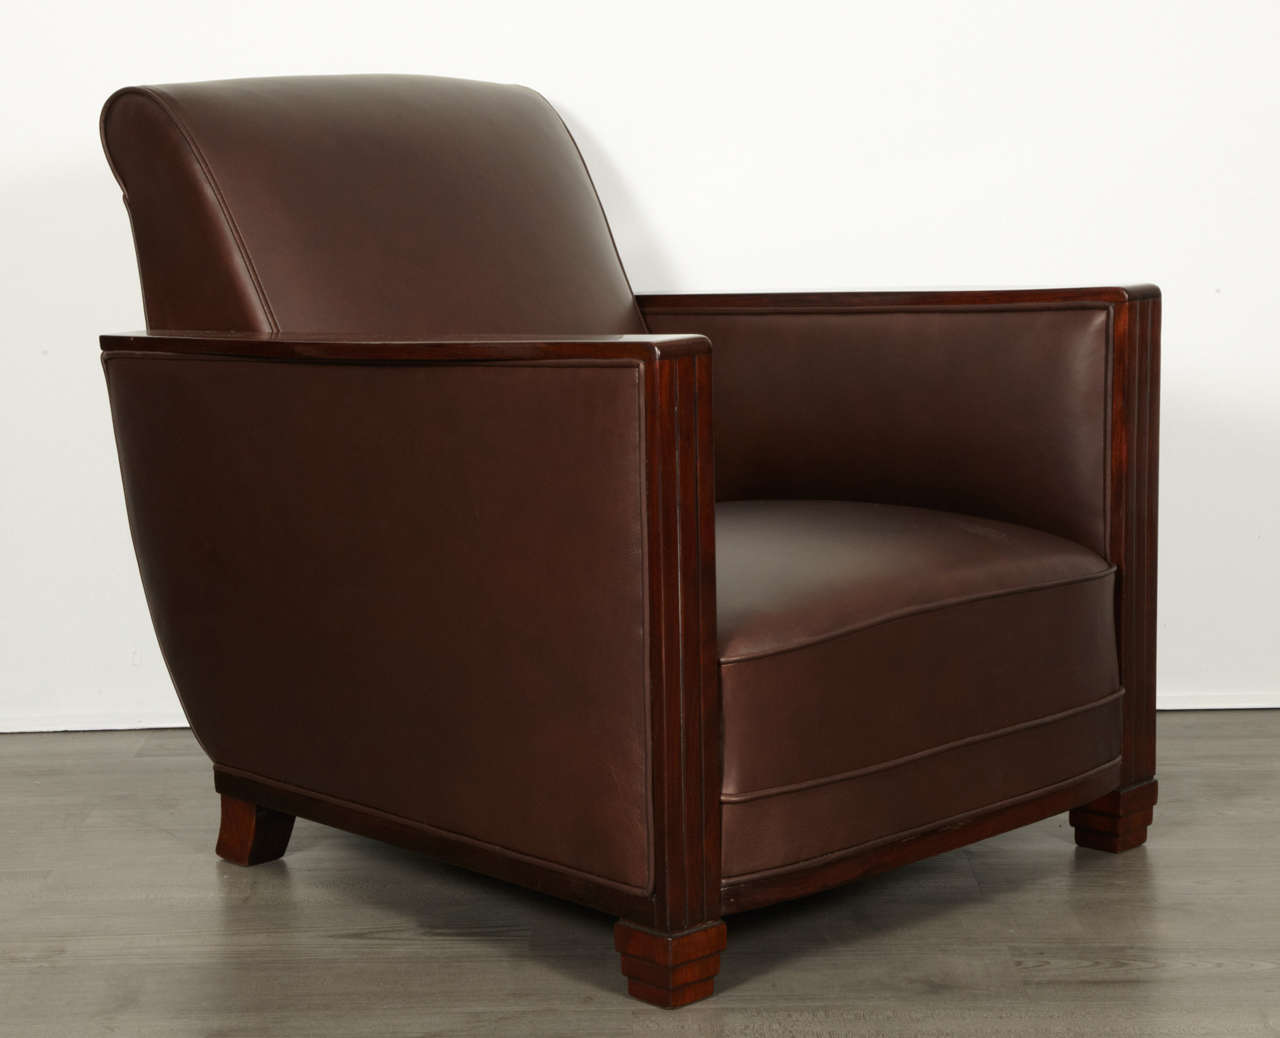 Mid-20th Century Christian Krass, A Pair of Ebony and Leather Armchairs For Sale